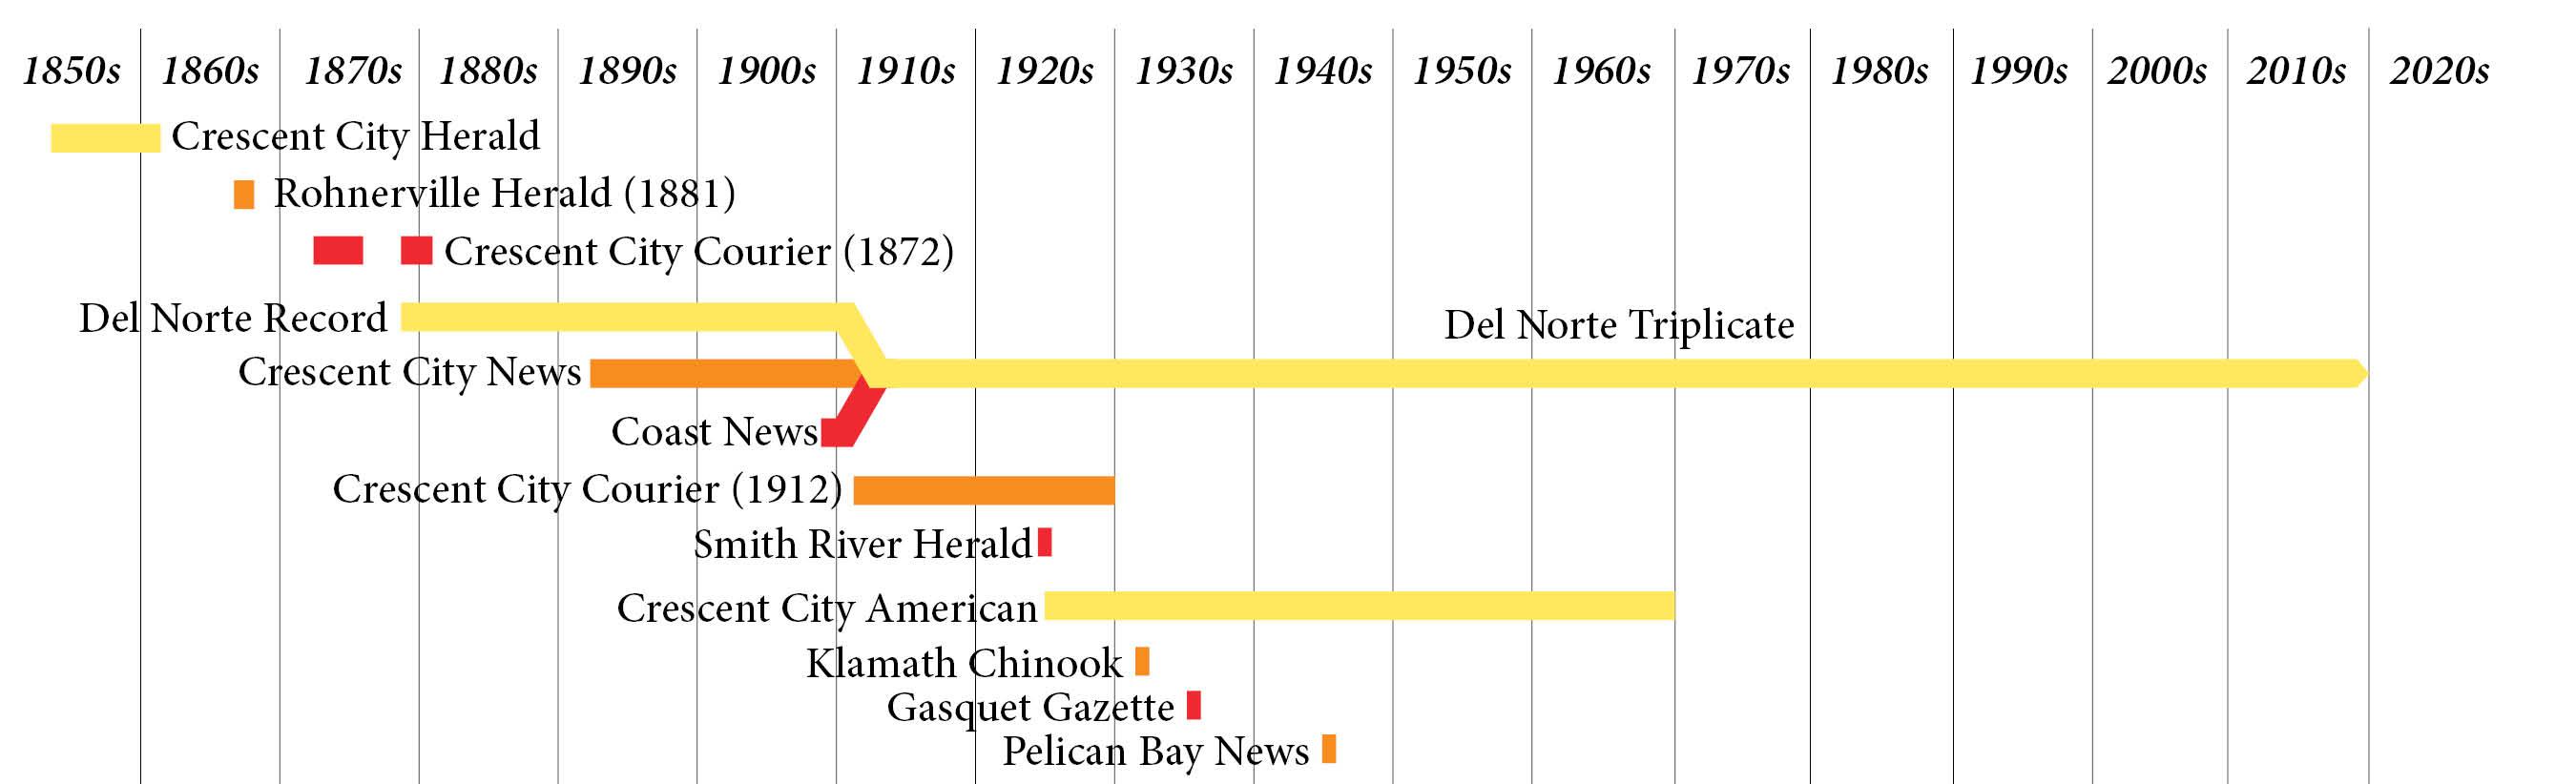 Timeline of Del Norte County newspapers